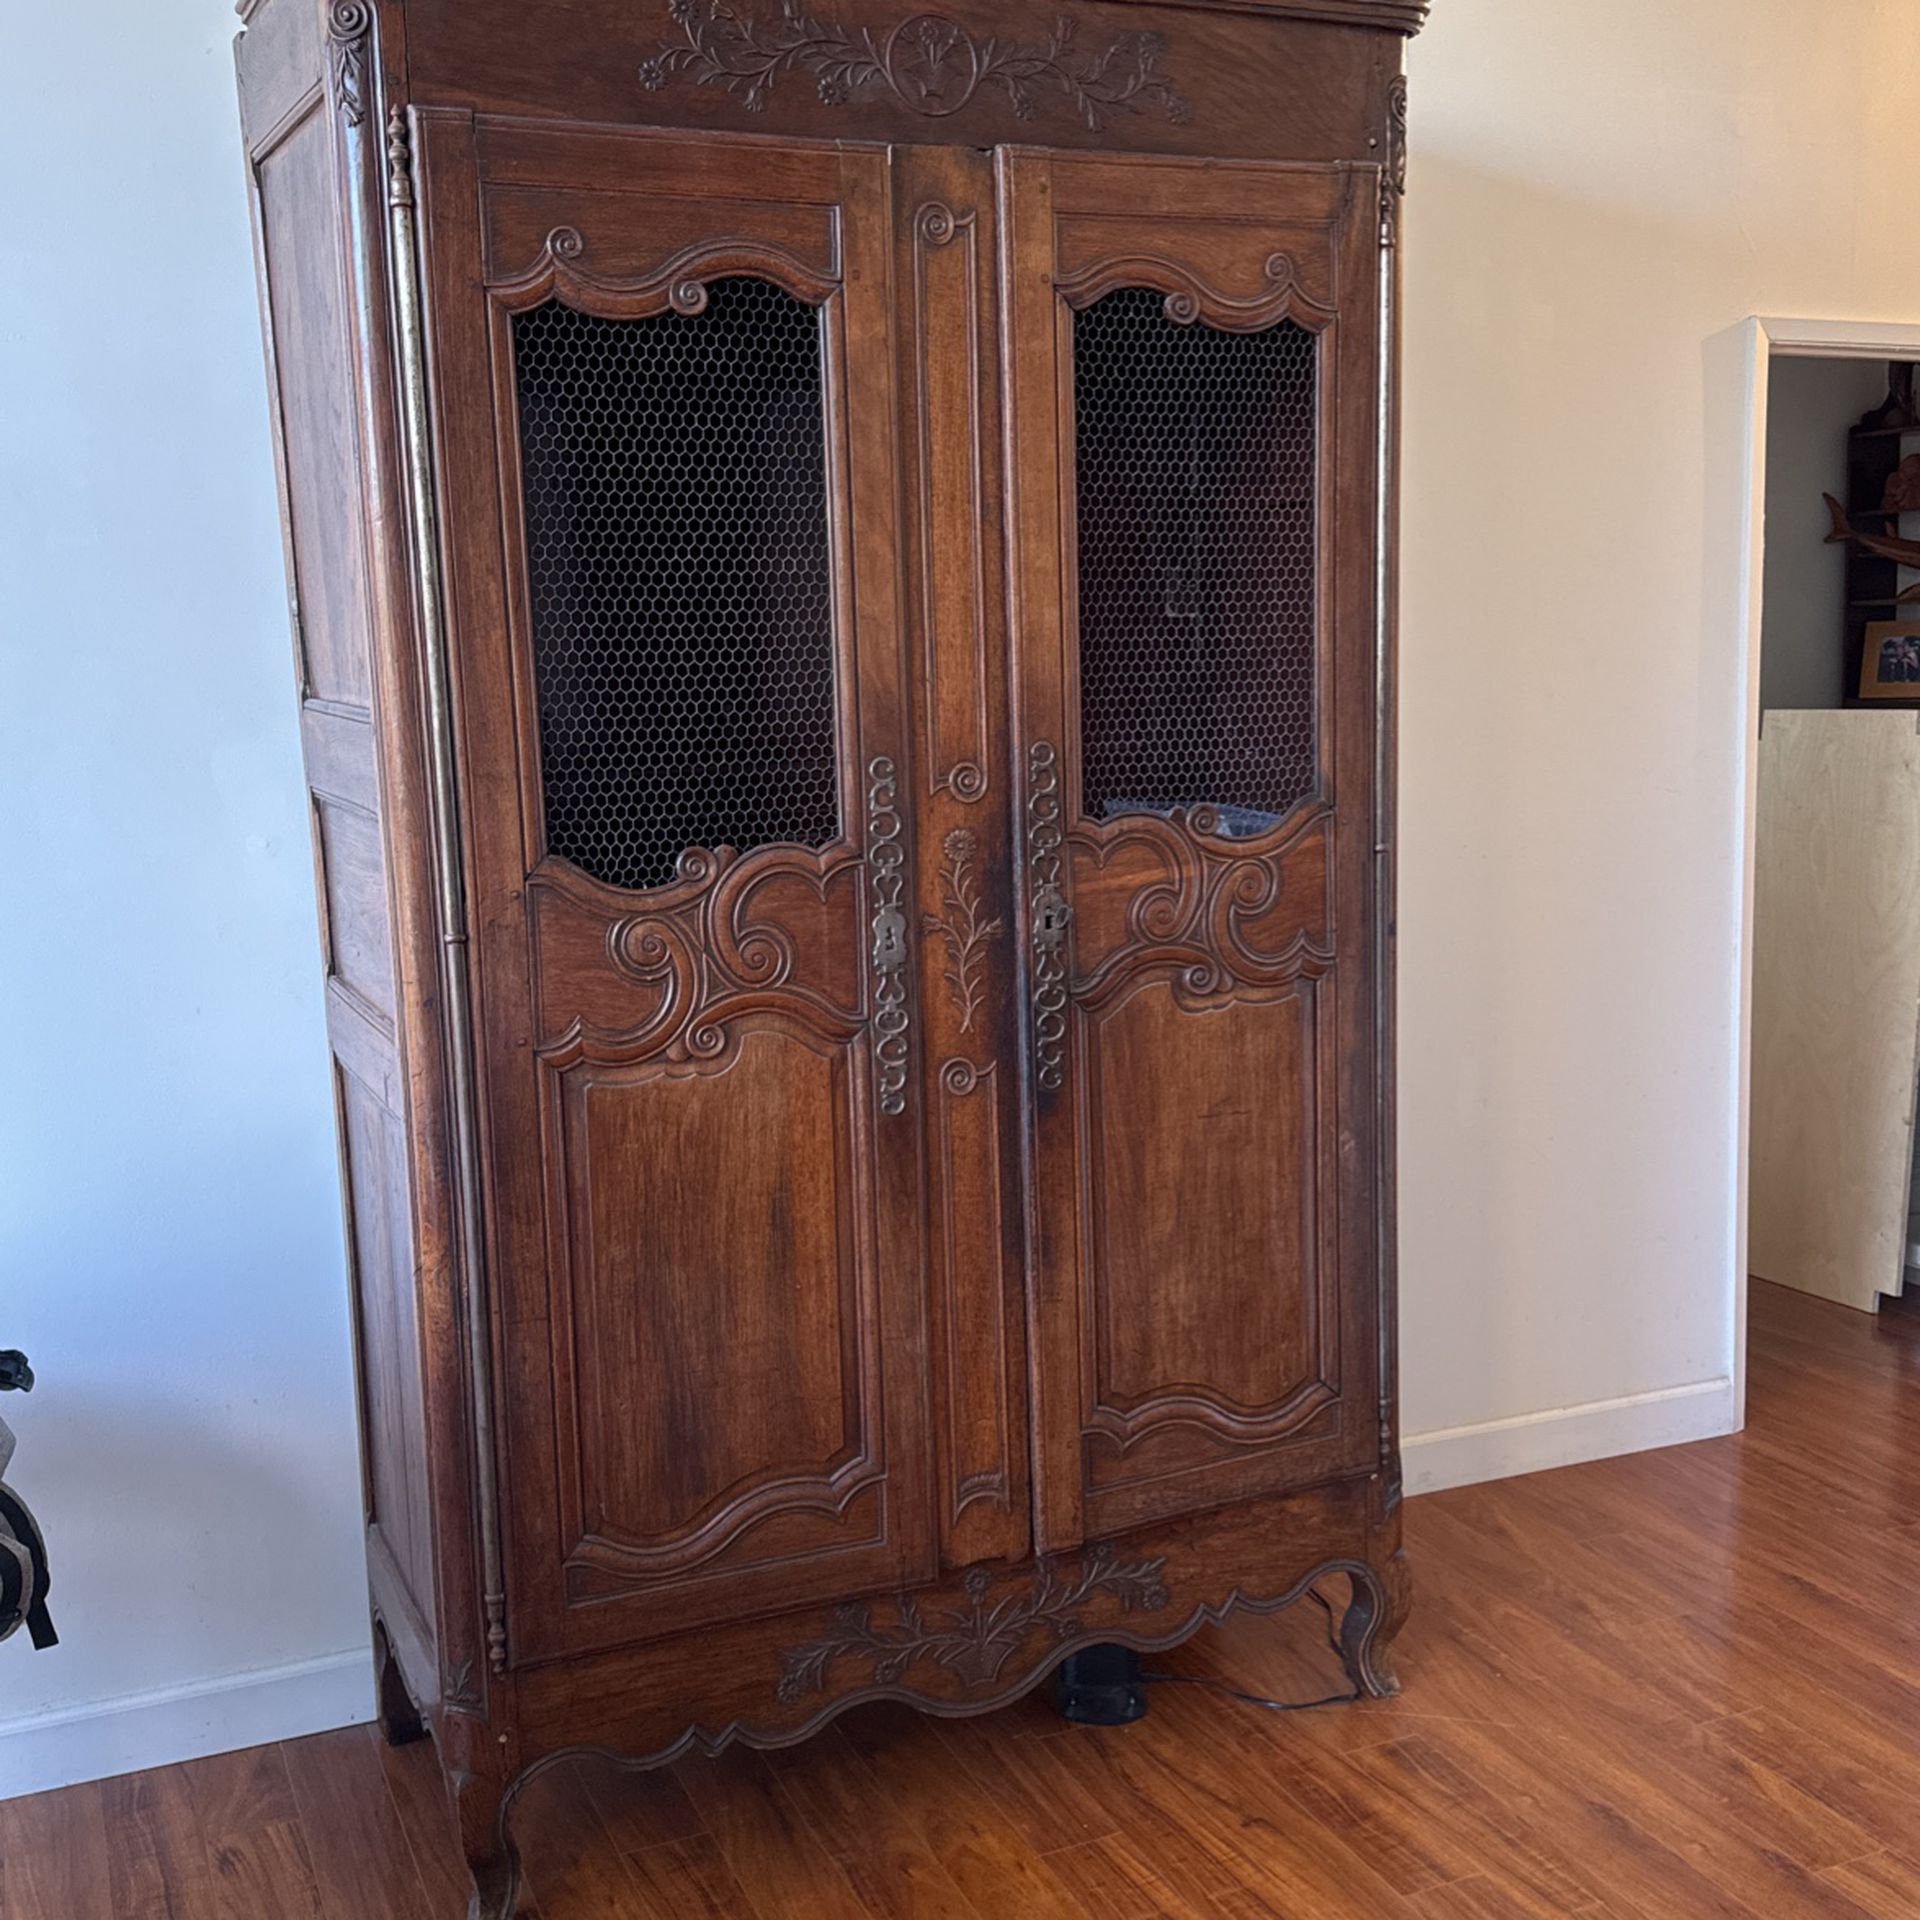 Louis 15th Armoire From 1700s. 